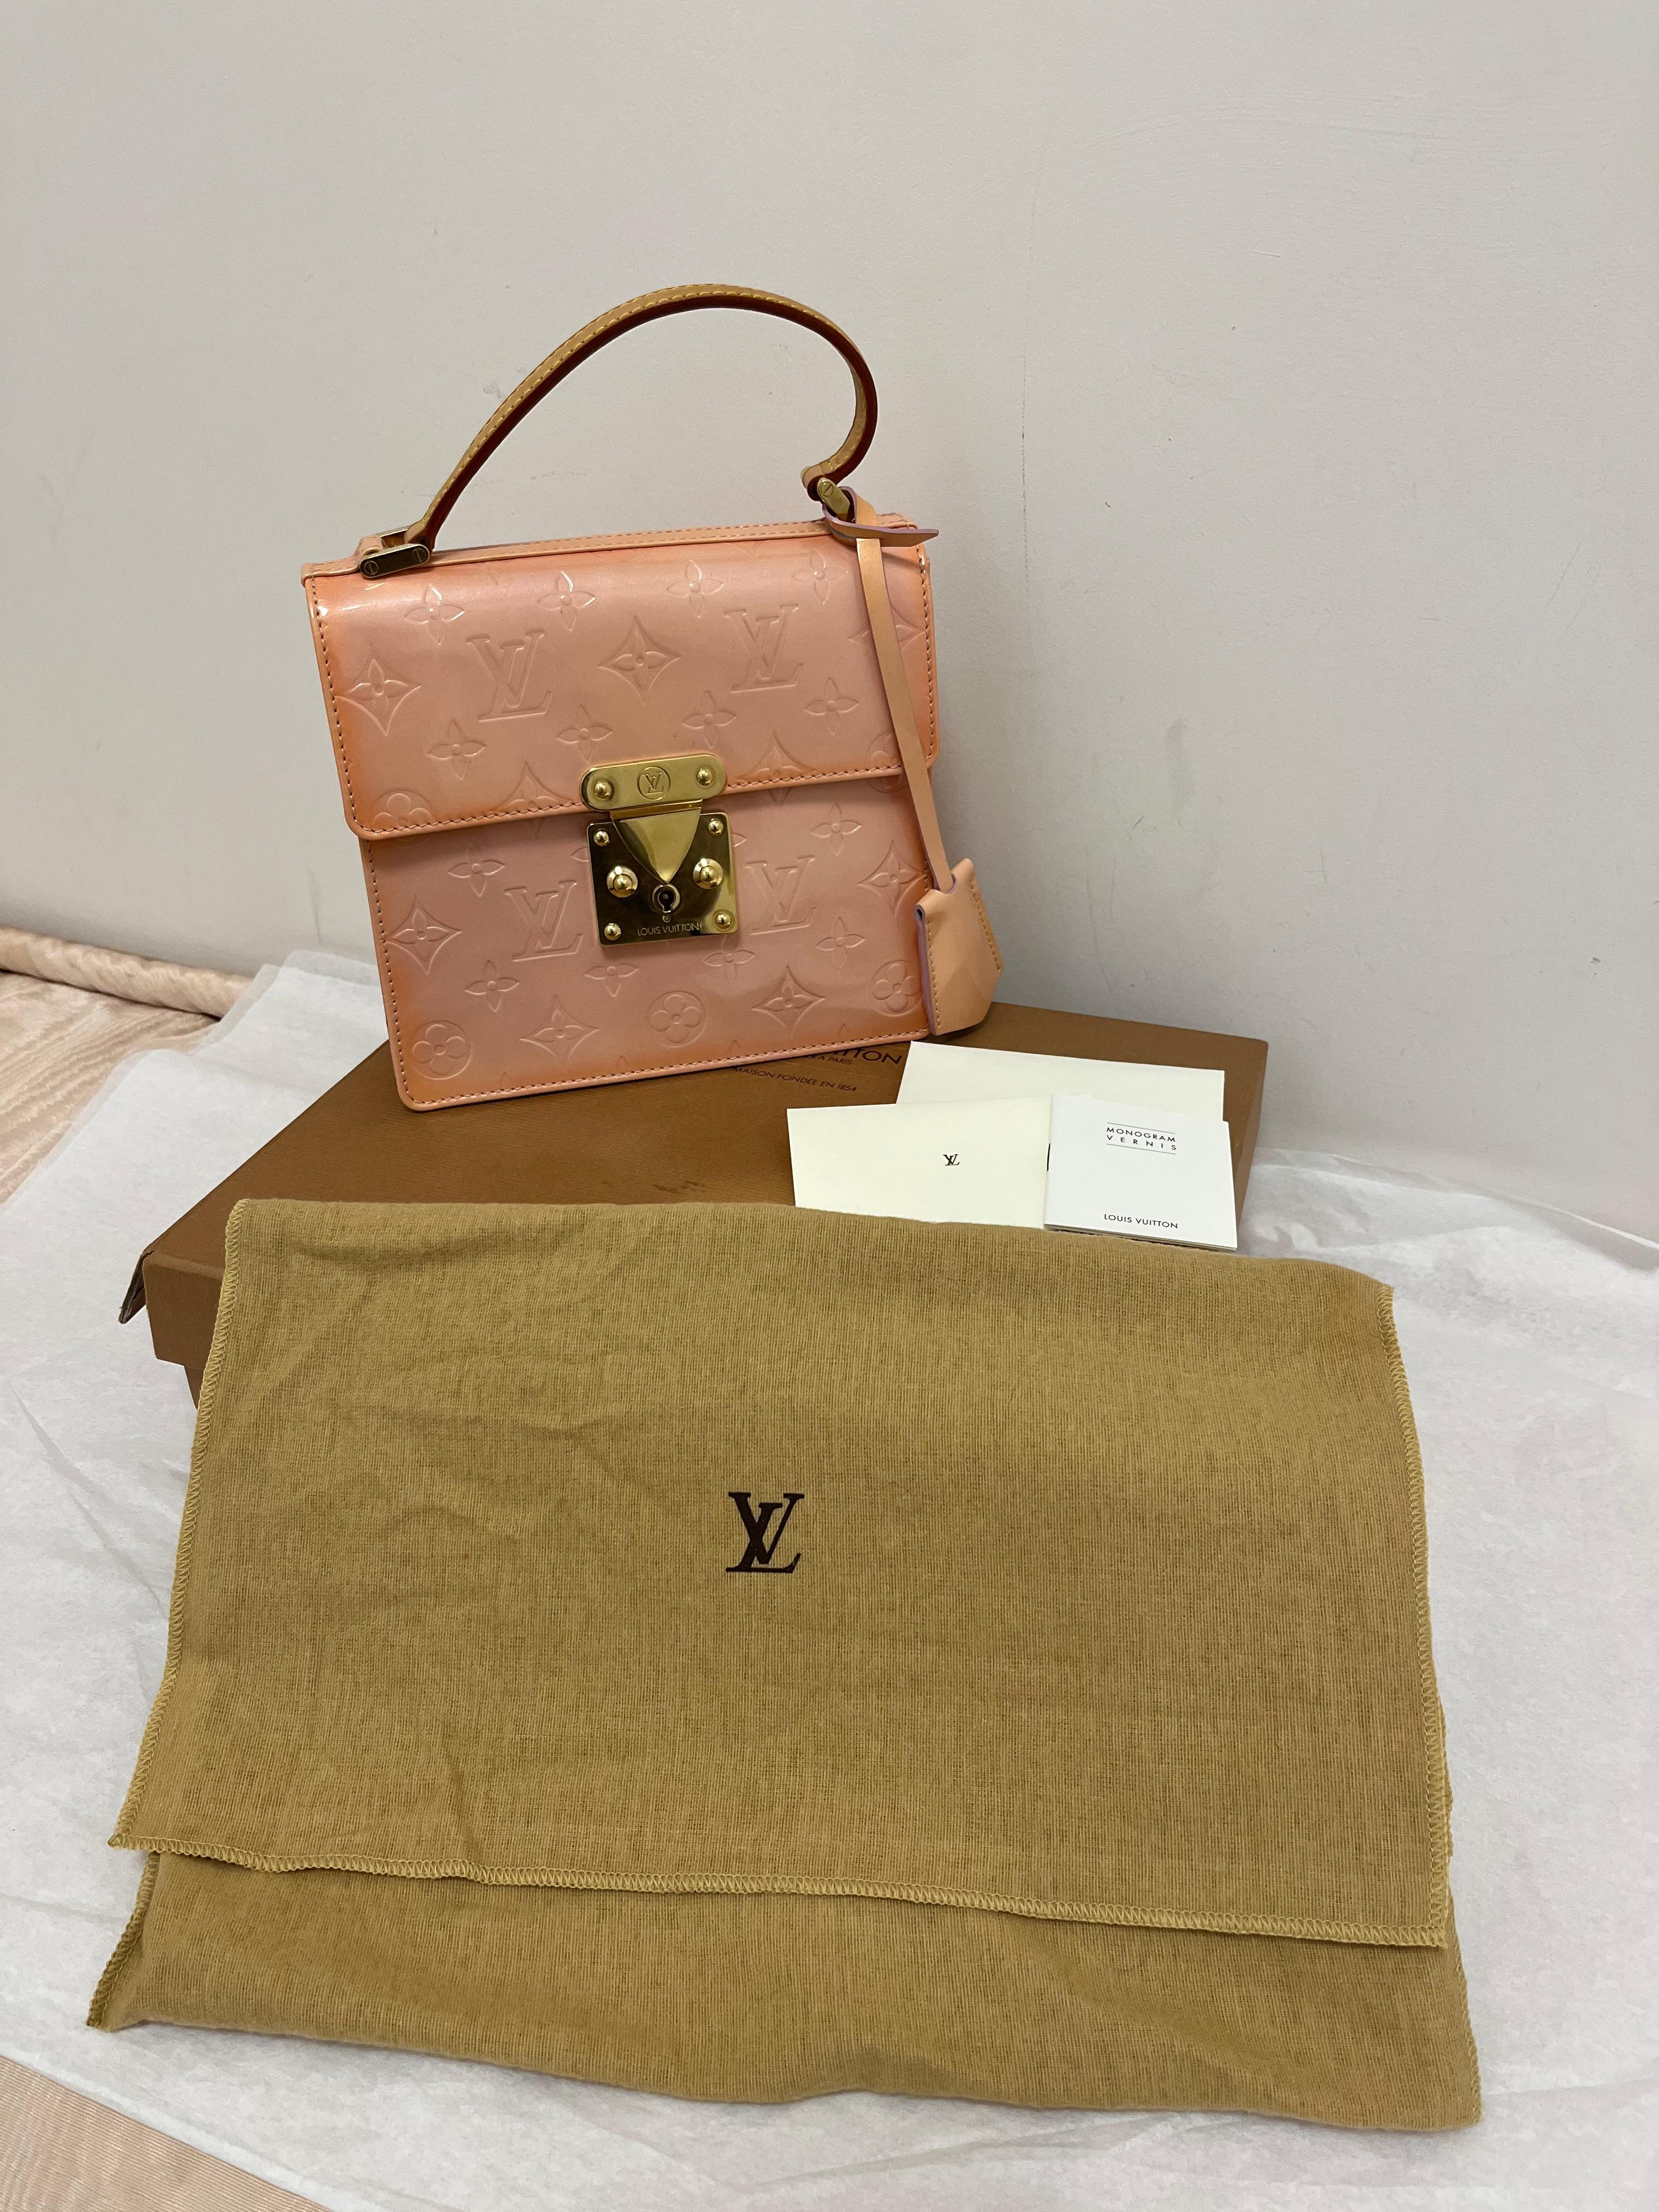 In excellent condition, this ombre pink/orange handbag, can be worn with leggings/jeans, as well as a cocktail dress, and in between. 
The bag was made in France and the serial# is VI0939 or March 1999; has gold-tone hardware; key and clochette;